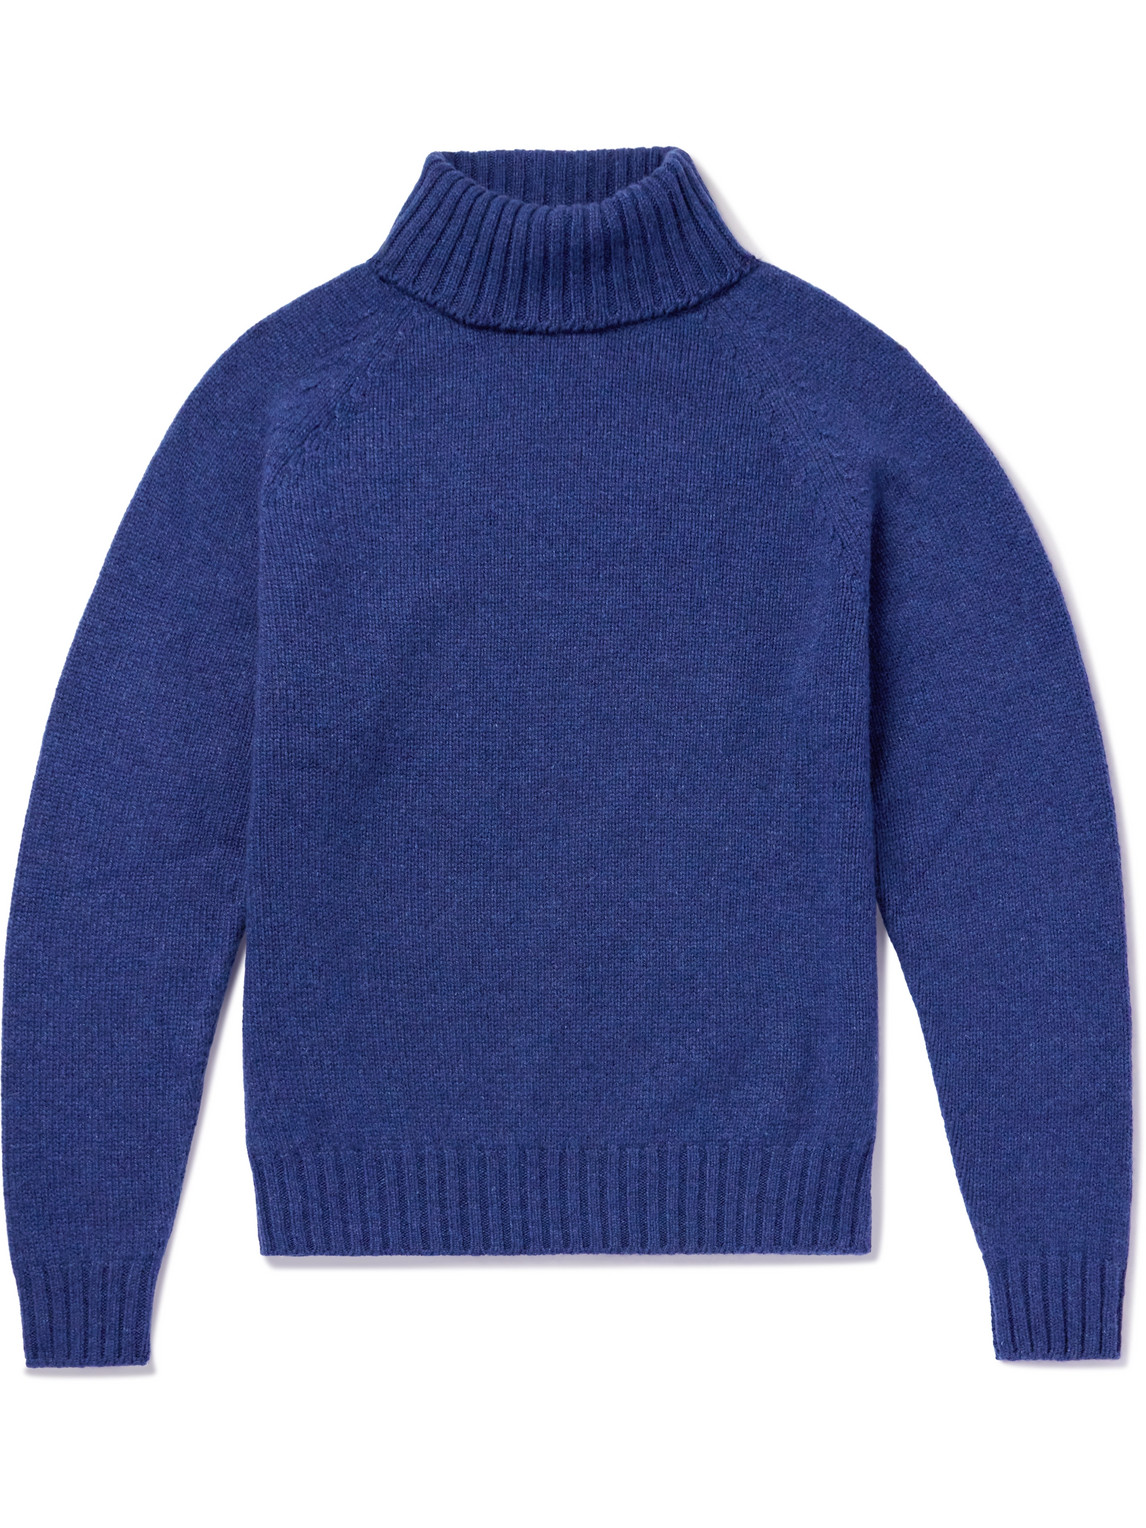 Umit Benan B+ Cashmere Rollneck Sweater In Blue